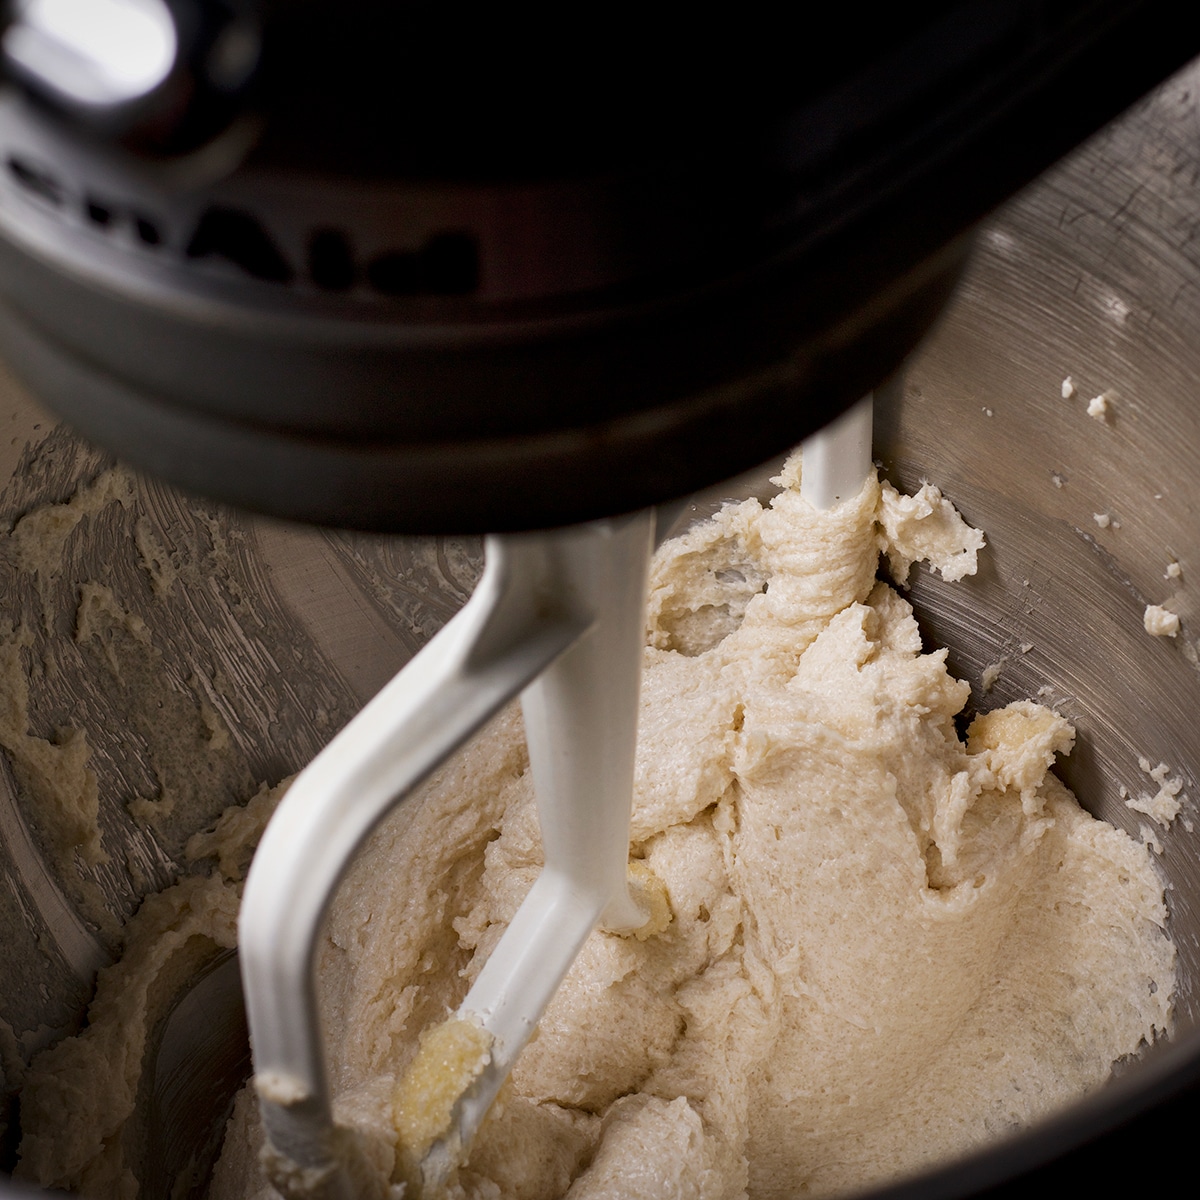 Using an electric mixer to beat butter and sugar until it's light in color and fluffy in consistancy.